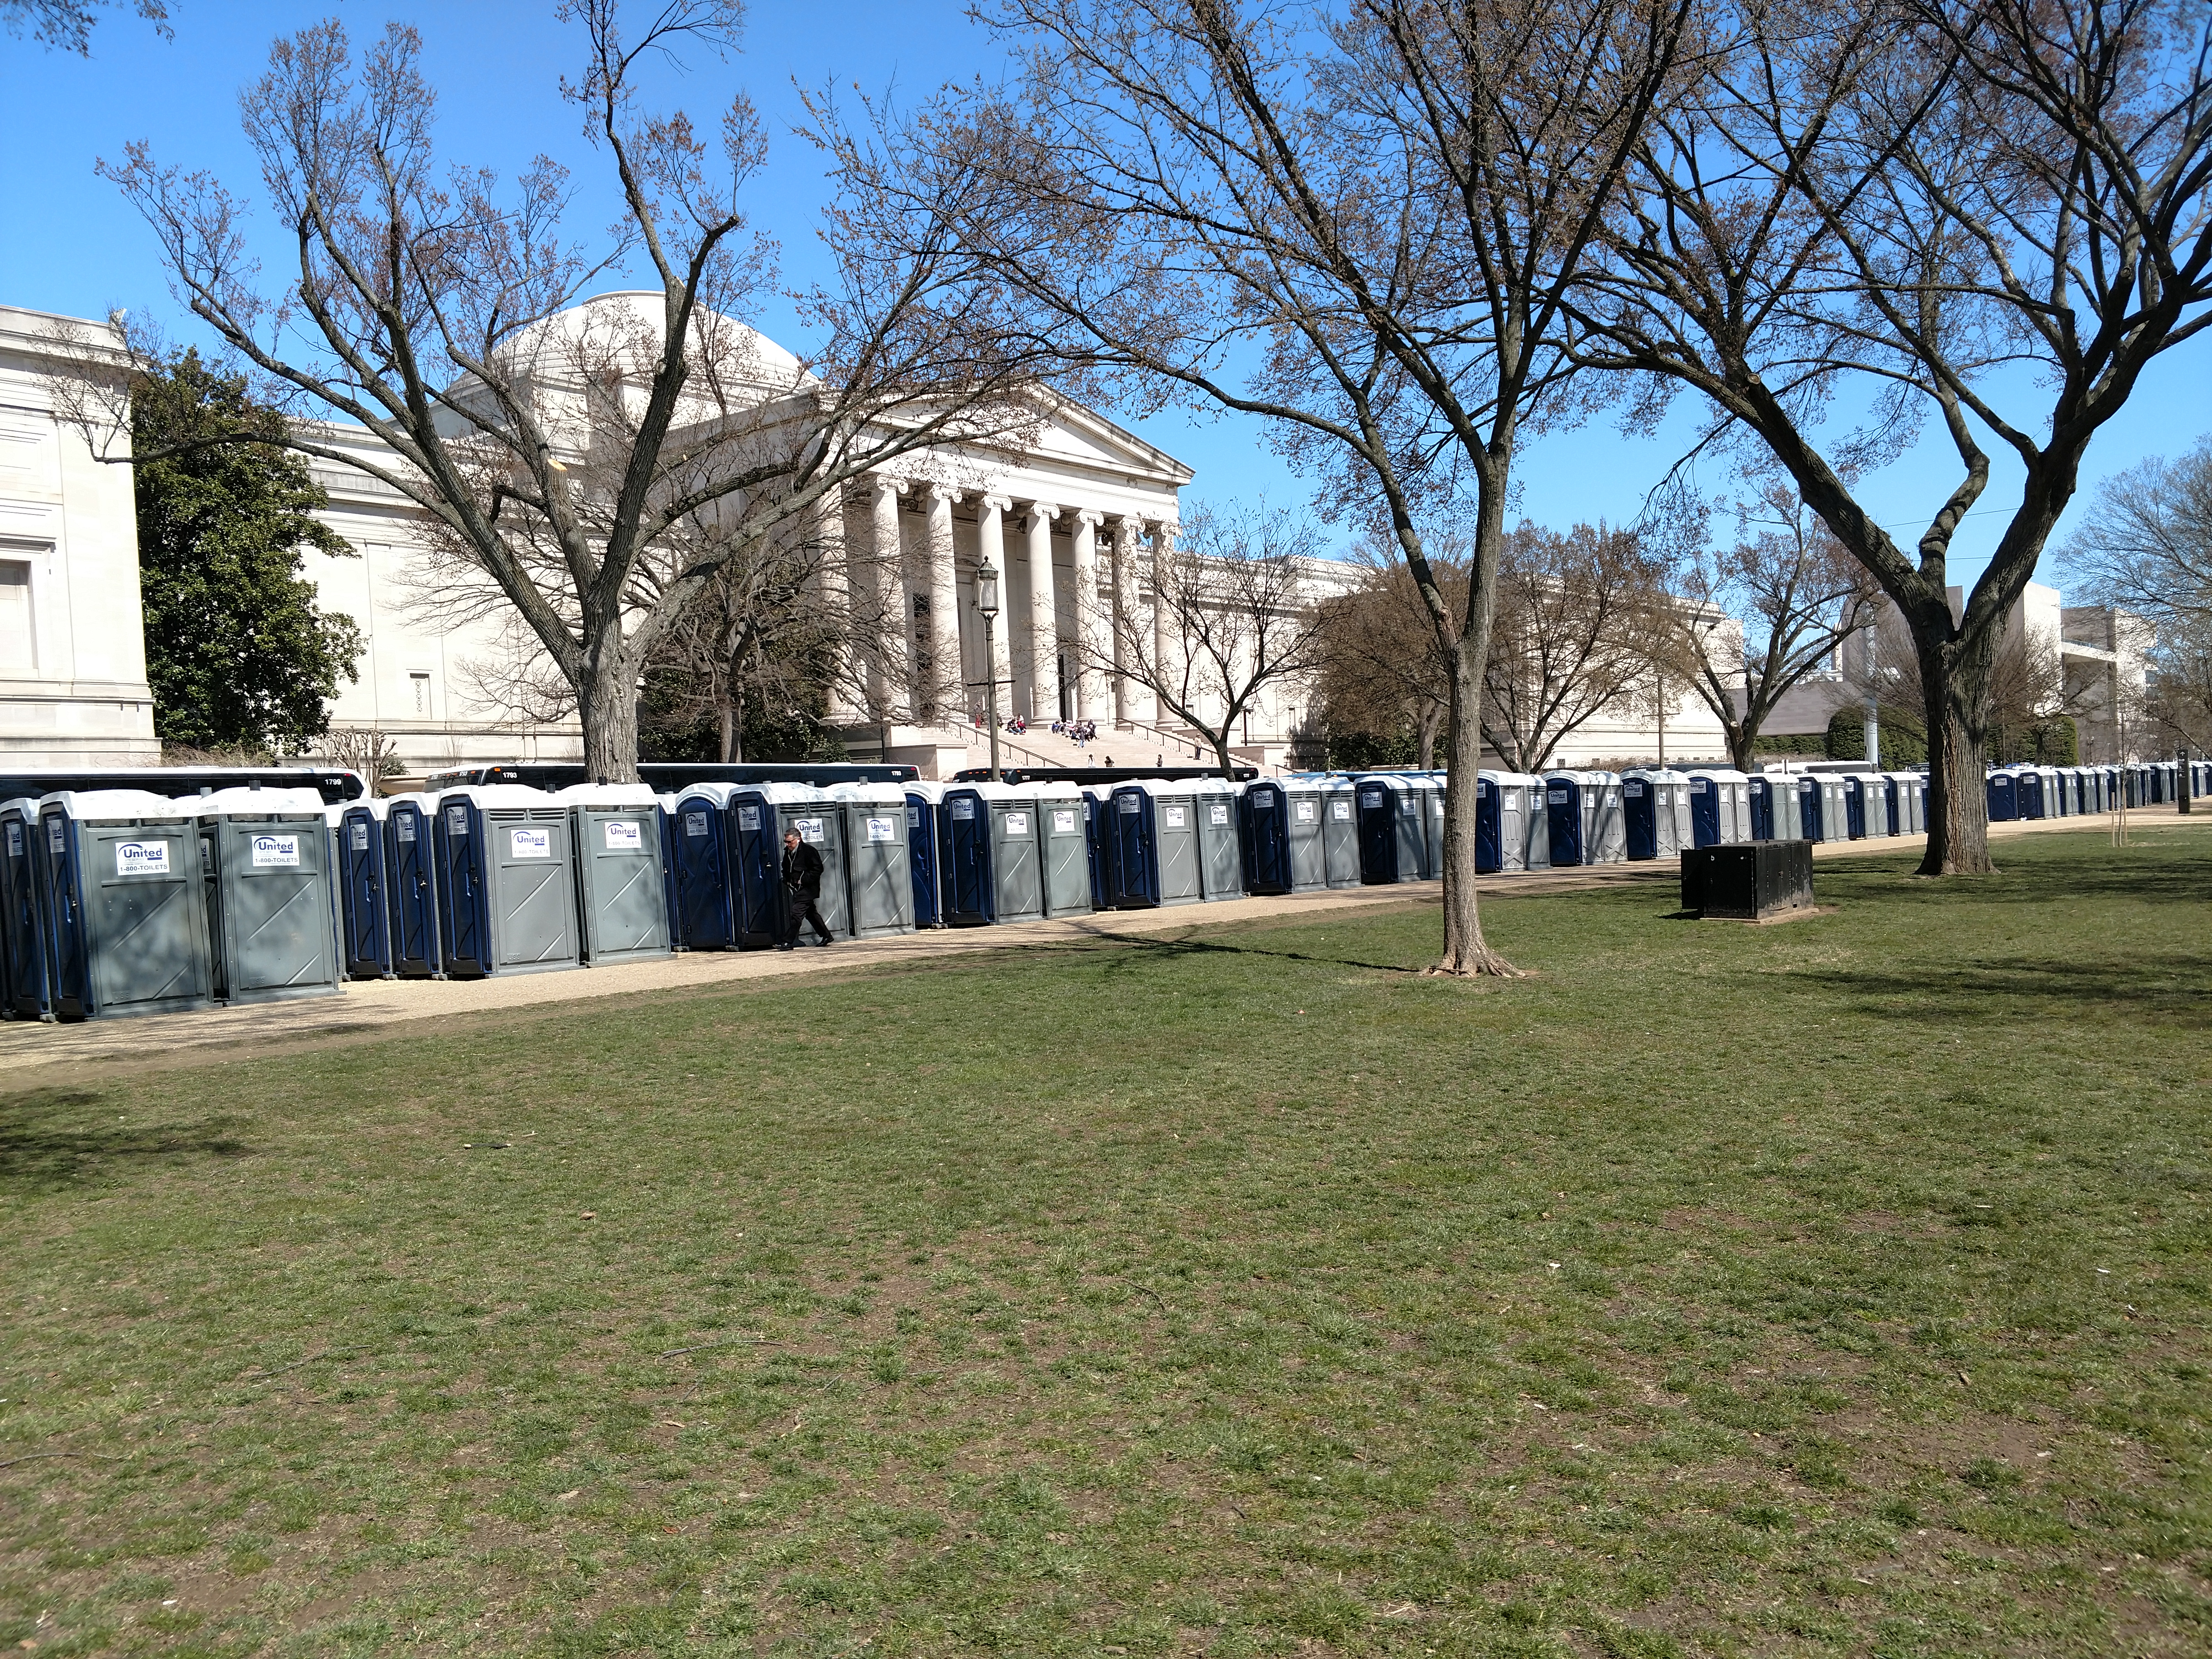 March for our lives - Rows of porta potties 02